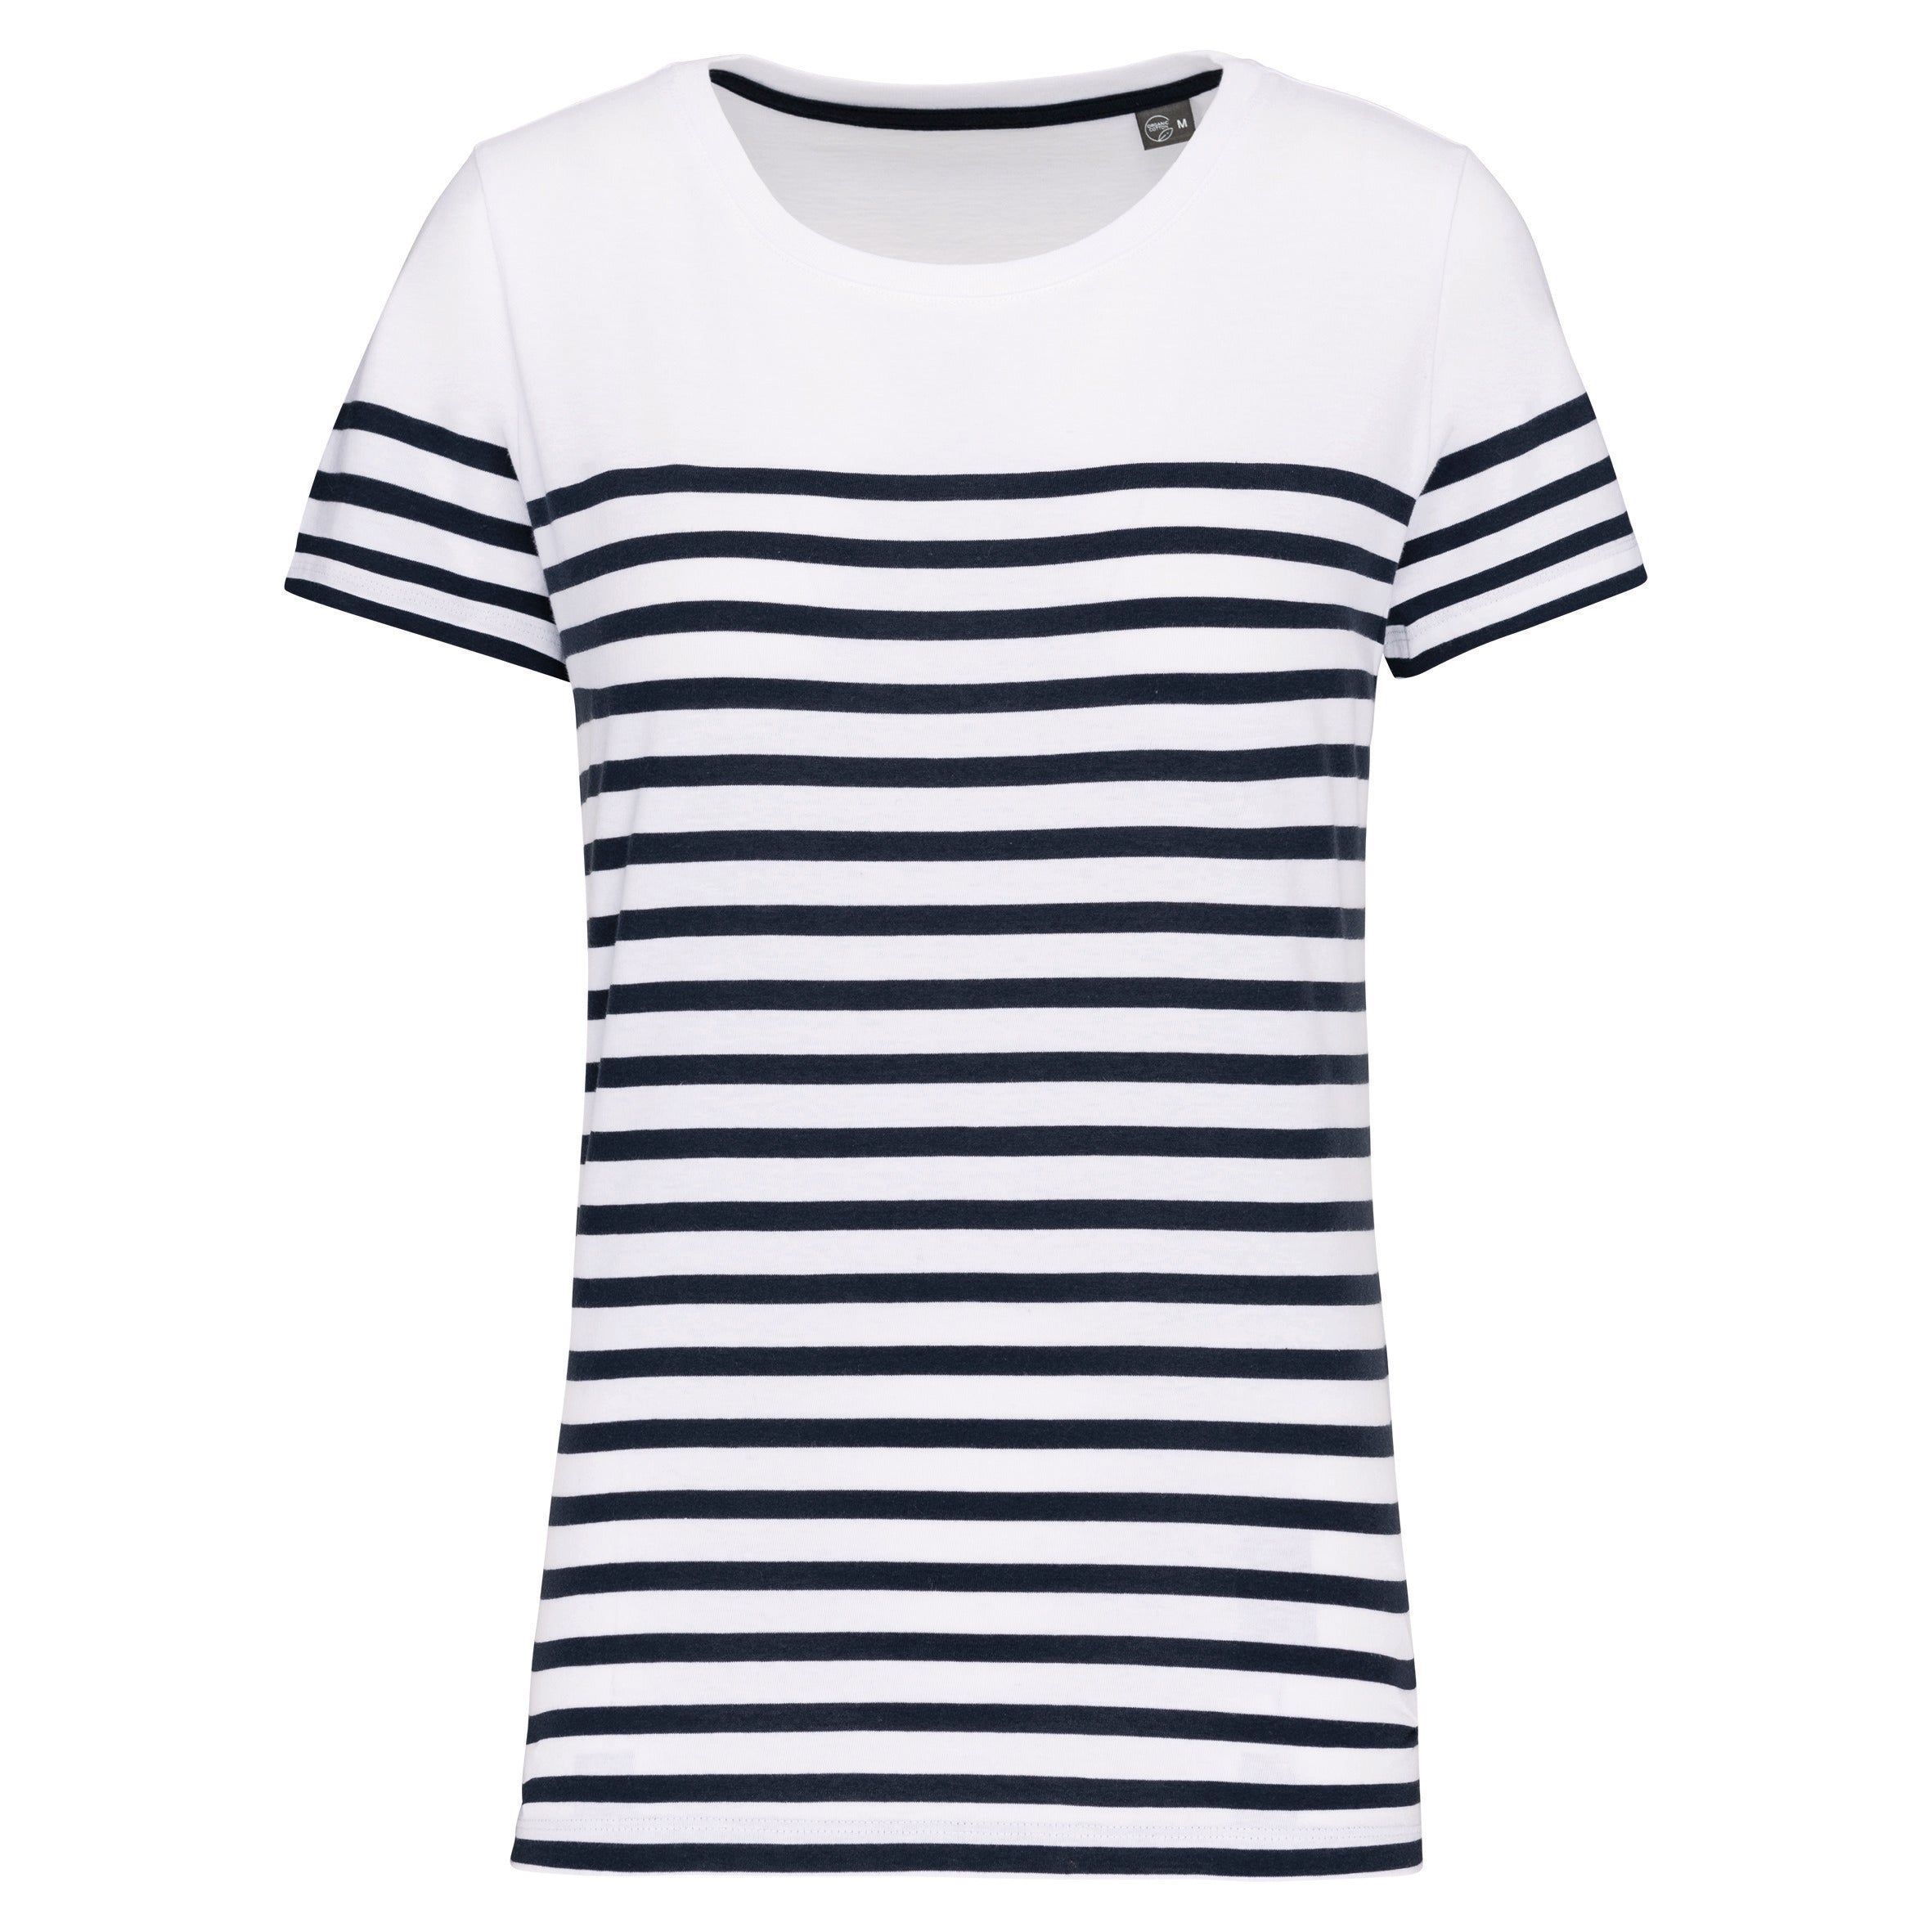 Sporty striped ladies' short-sleeved t-shirt